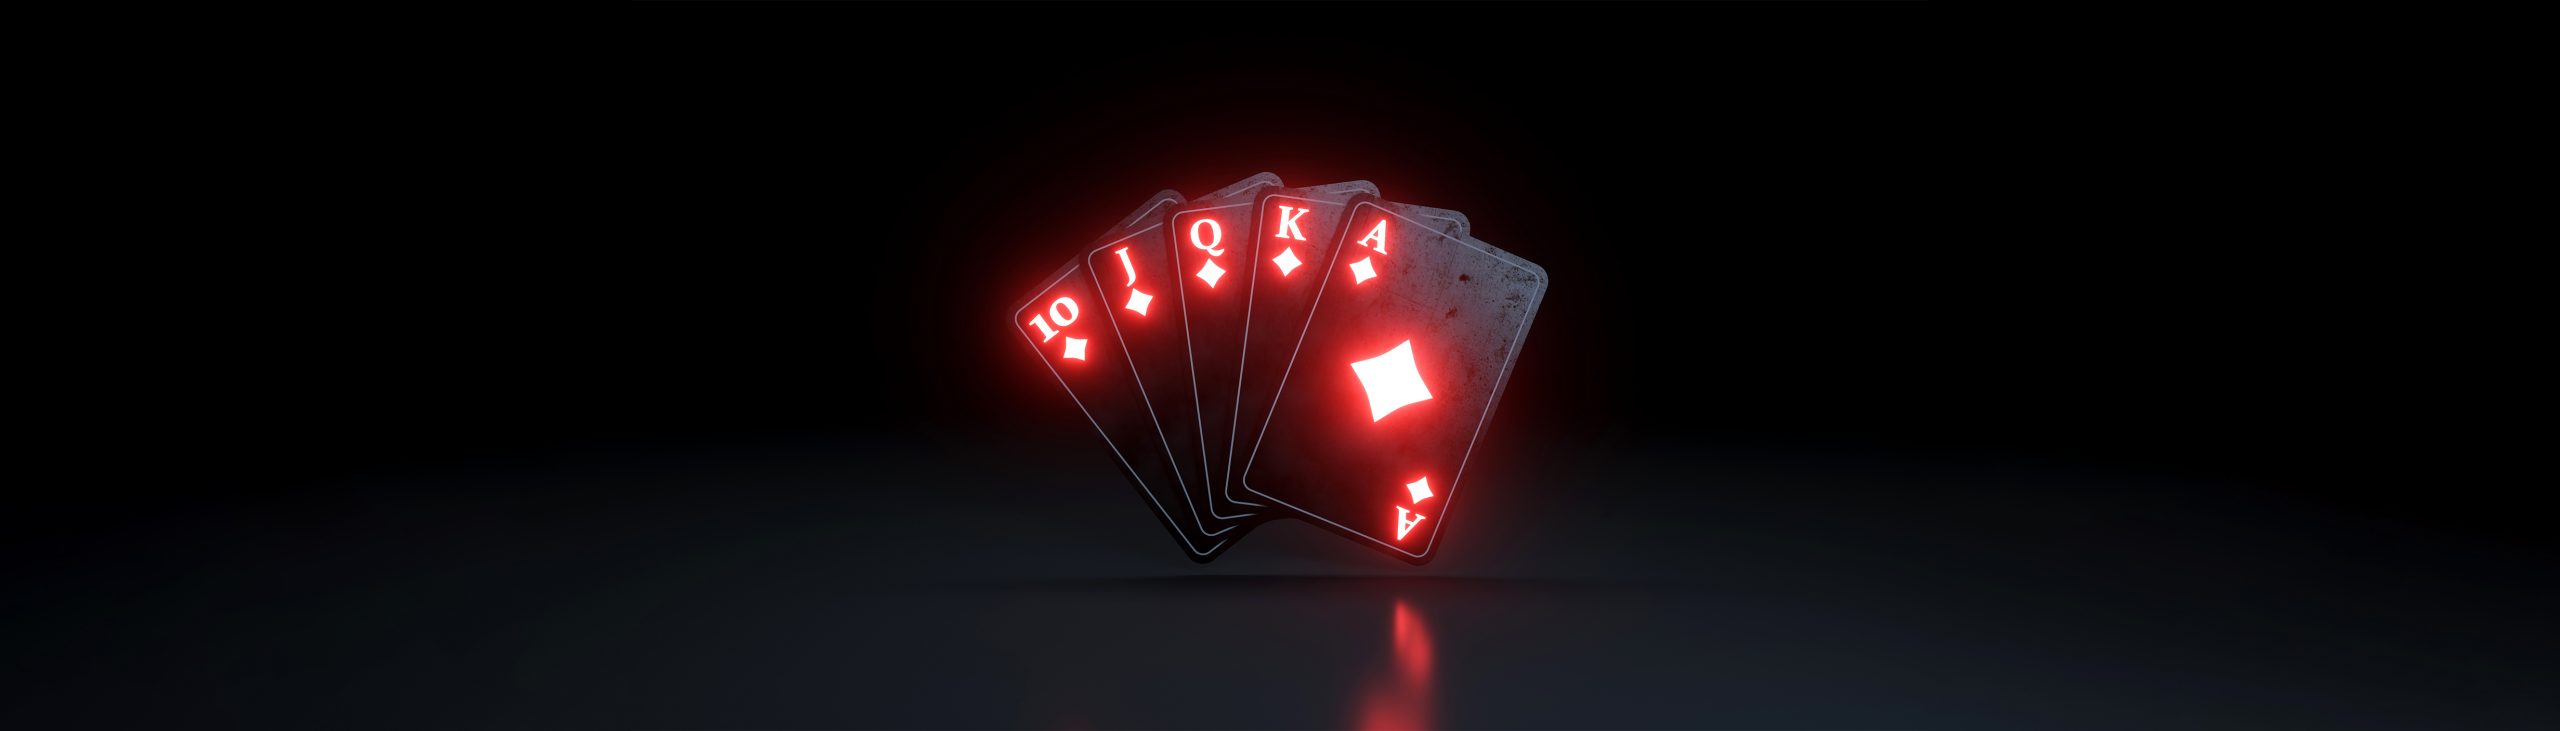 Royal Flush in Diamonds Poker Playing Cards With Neon Lights Iso